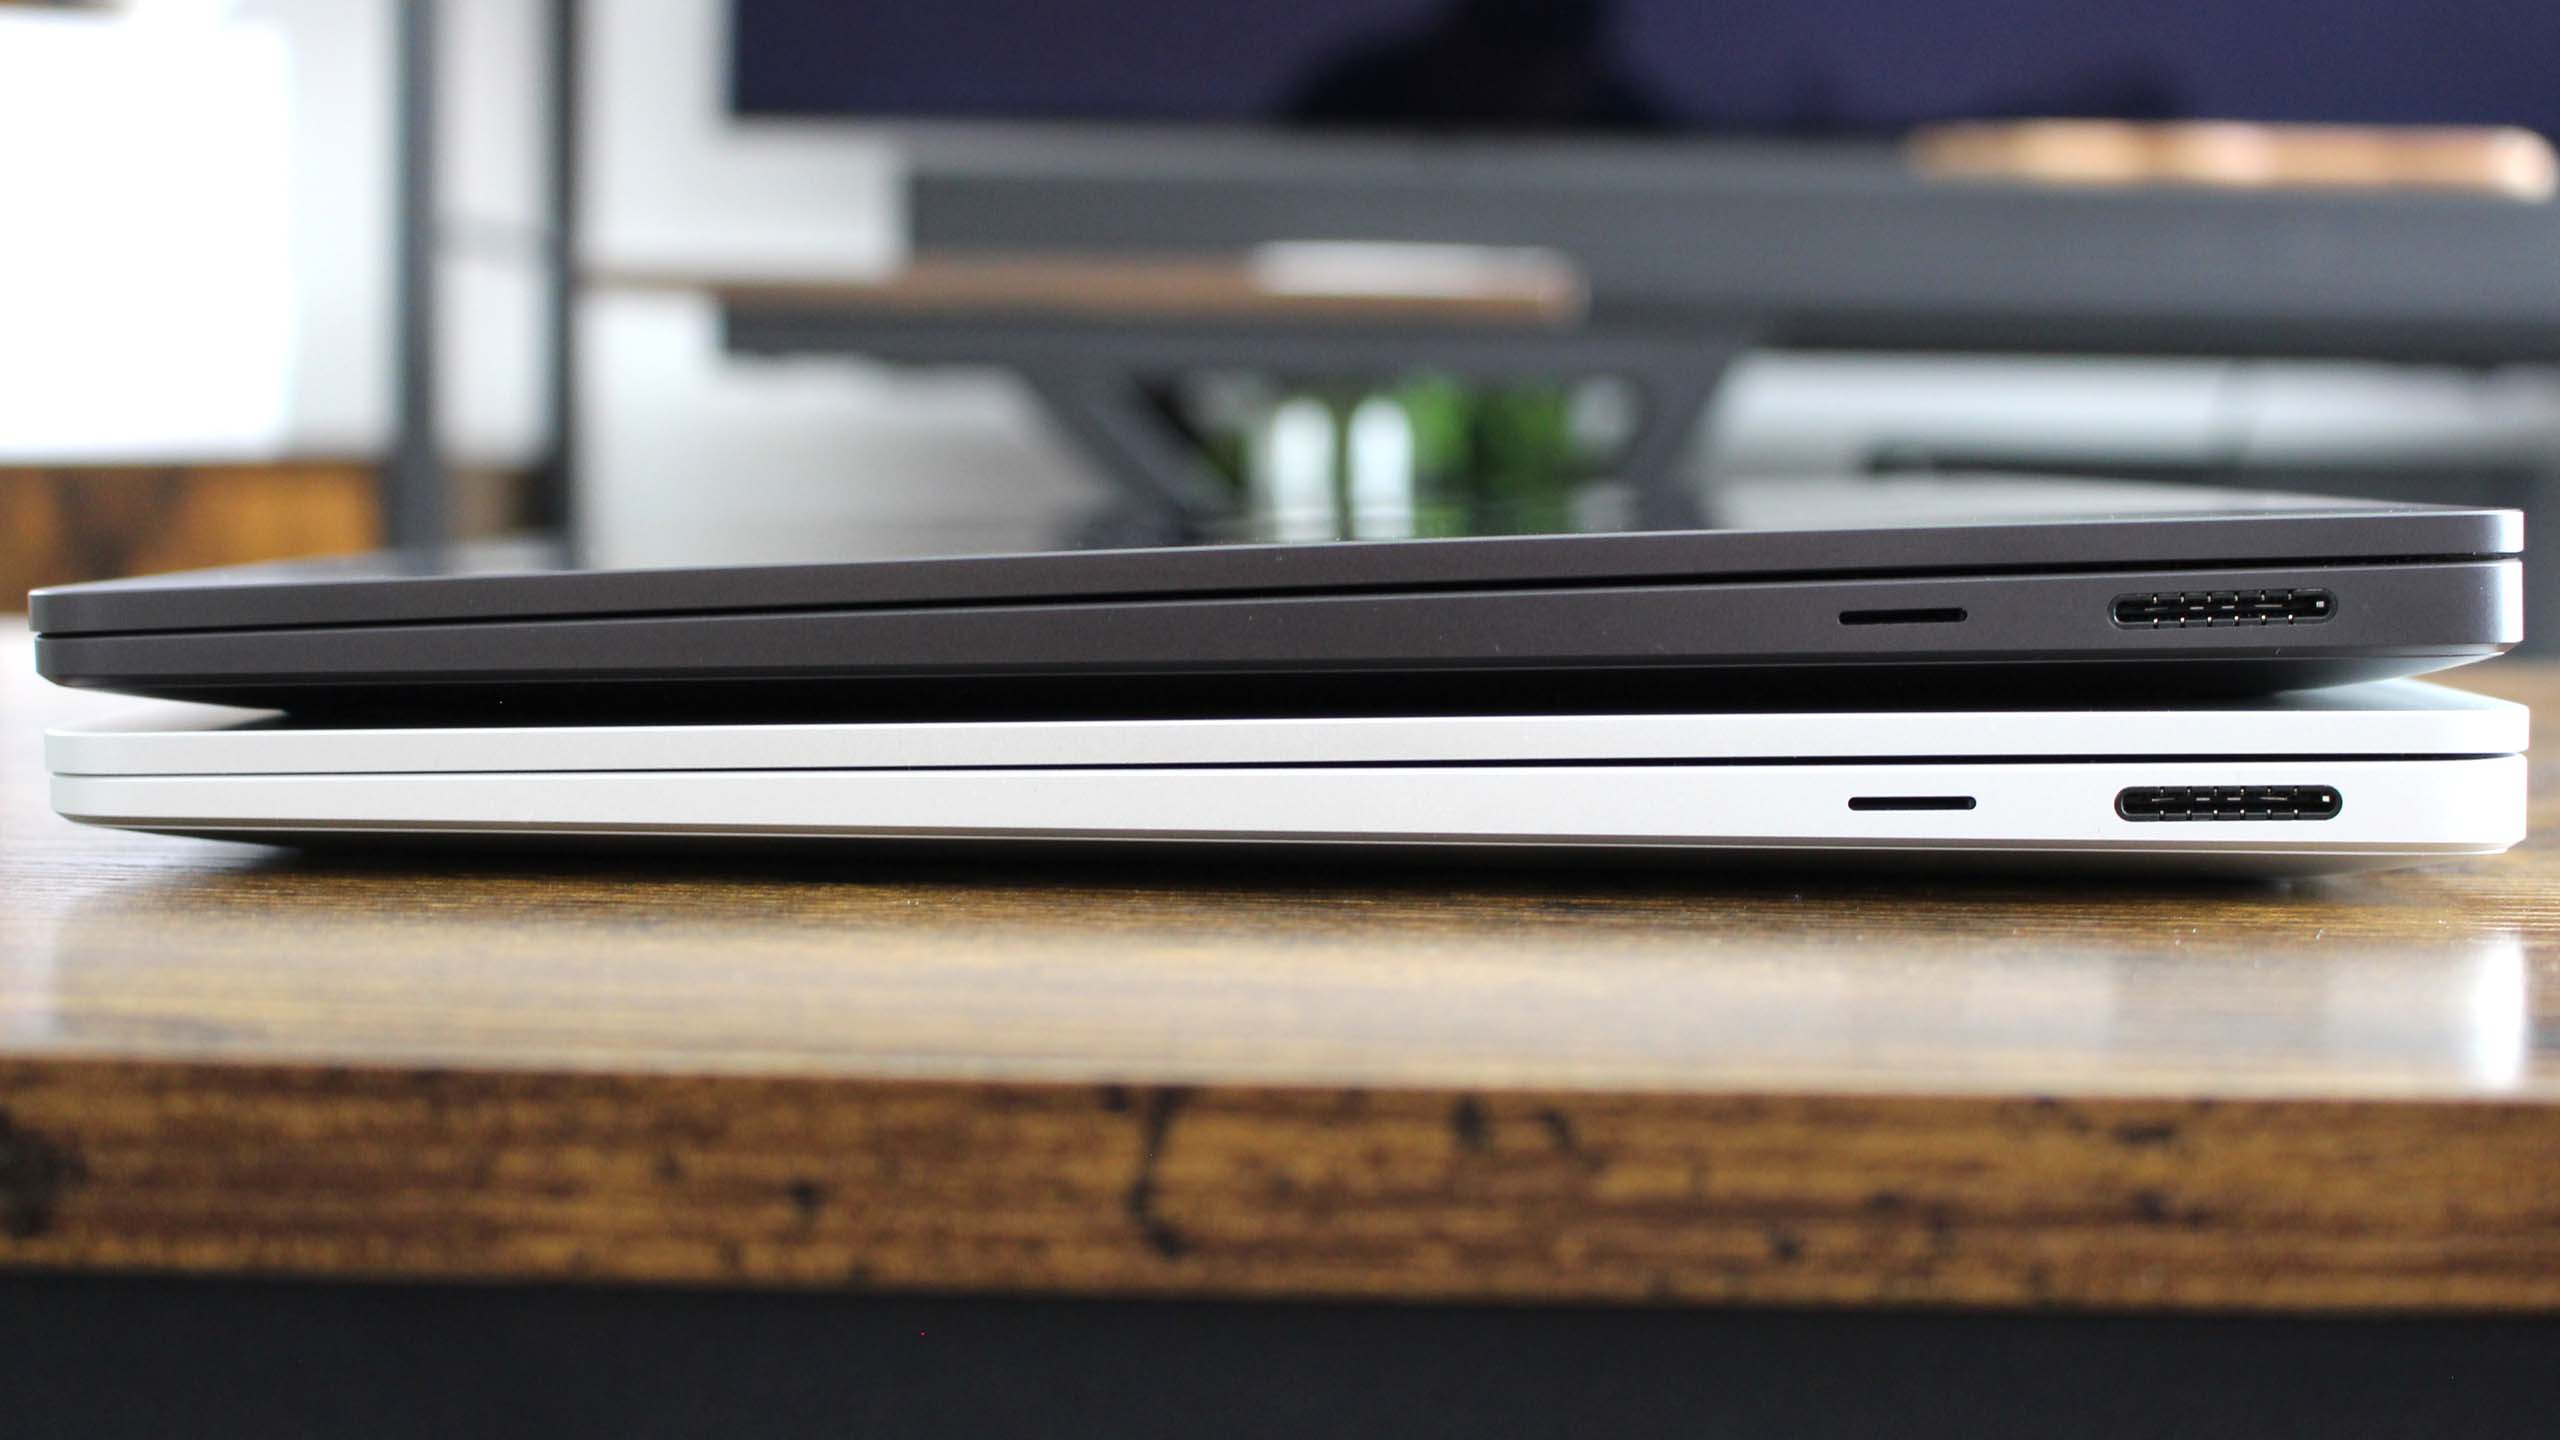 Two Surface Laptop models stacked with black and silver models on a wooden table